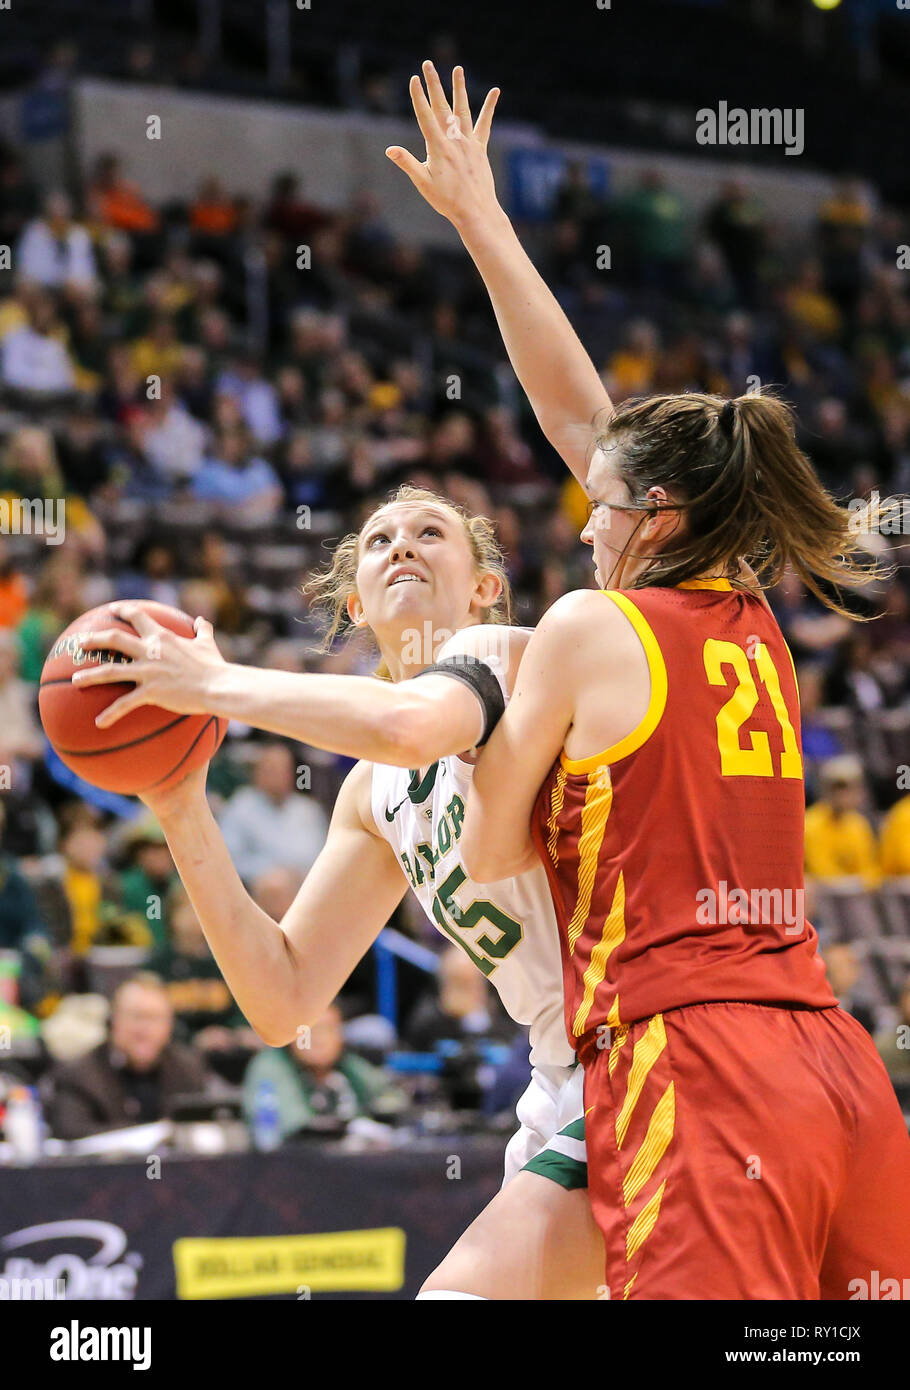 Oklahoma City, OK, USA. 11th Mar, 2019. Baylor Forward Lauren Cox (15) is defended by Iowa State Guard Bridget Carleton (21) during the Phillips 66 Big 12 Womens Basketball Championship Final game between the Baylor Lady Bears and the Iowa State Cyclones at Chesapeake Energy Arena in Oklahoma City, OK. Gray Siegel/CSM/Alamy Live News Stock Photo